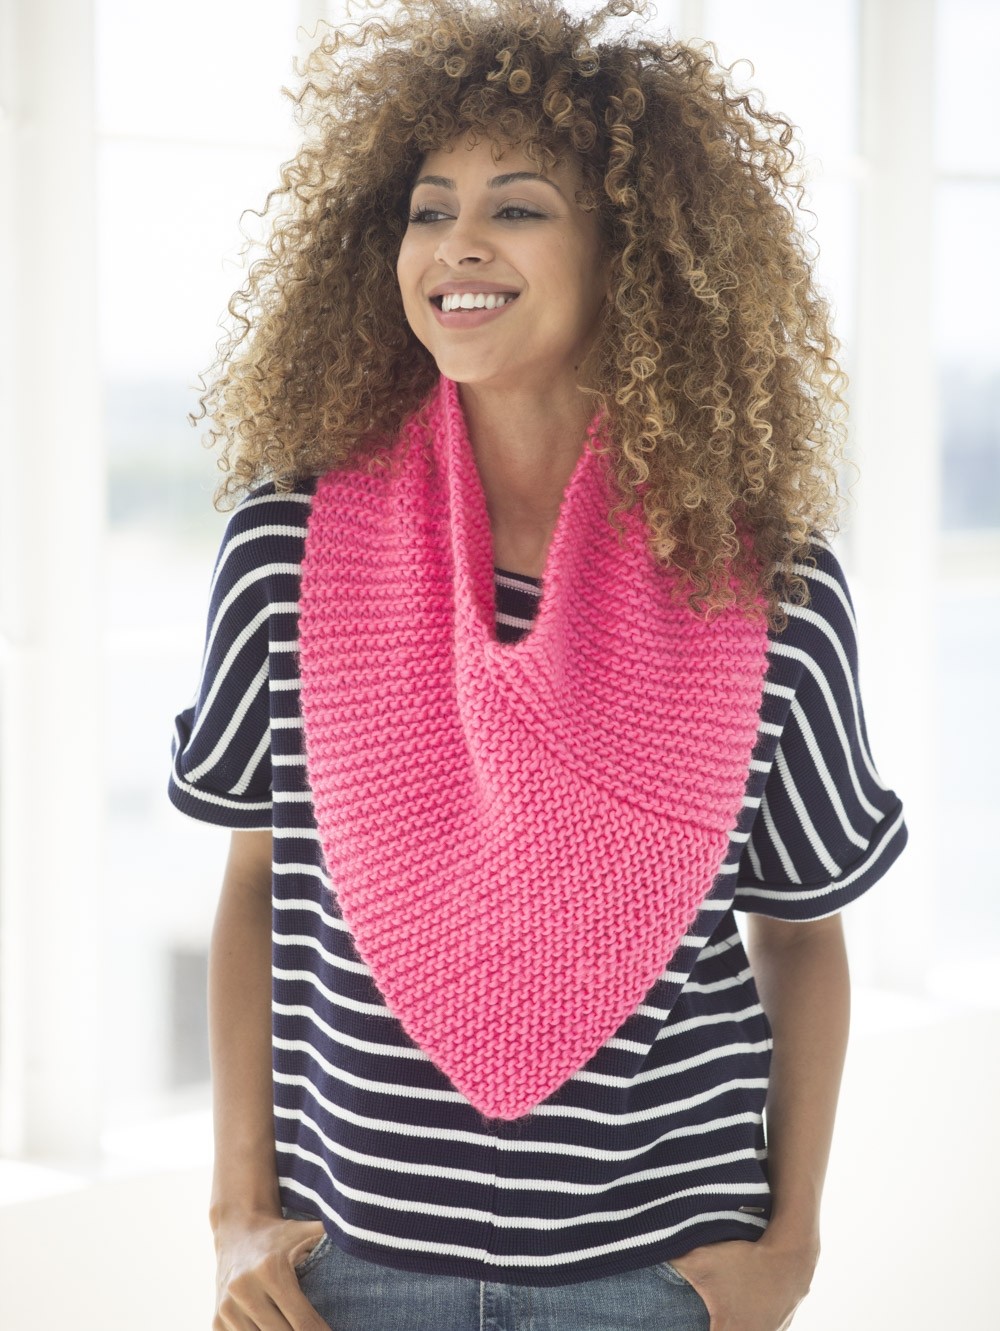 Back to the Fuschia Knit Cowl